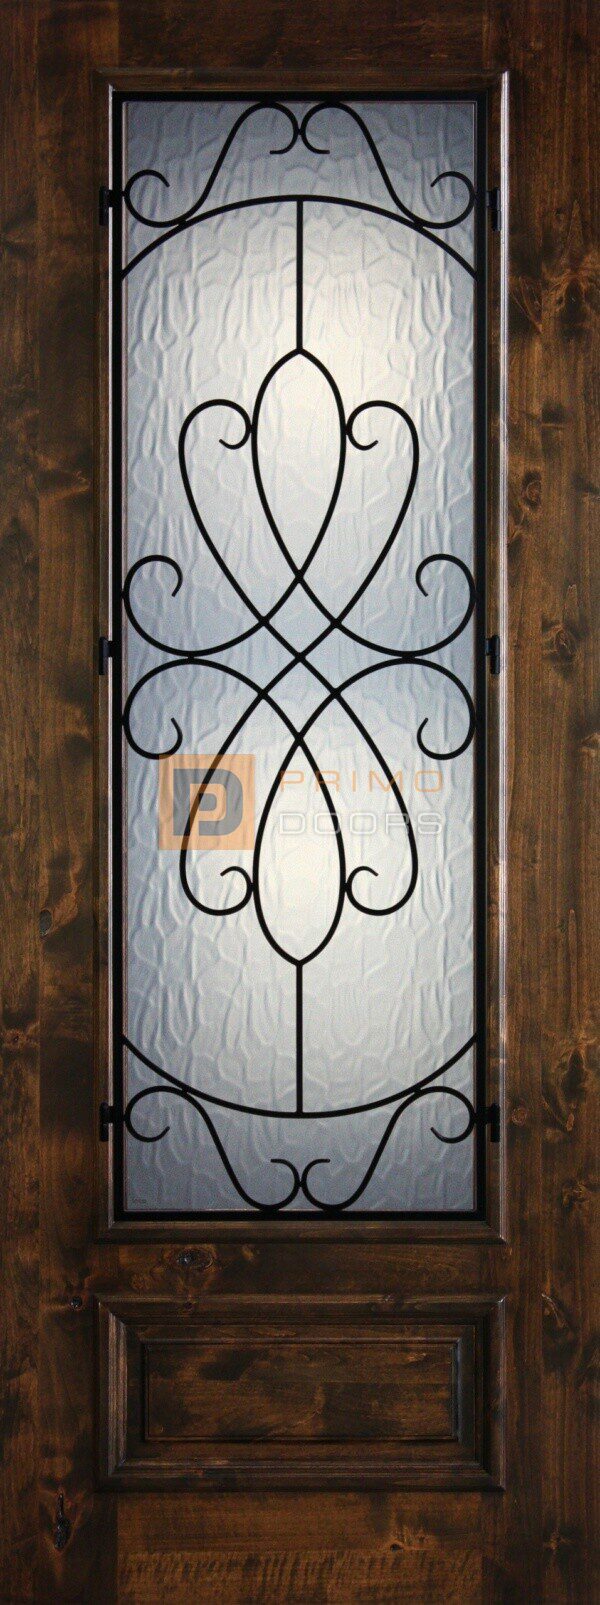 8′ 3/4 Lite Knotty Alder Decorative Glass with Iron Grill Single Iron Front Door – PD KA 3080-34 WHIT